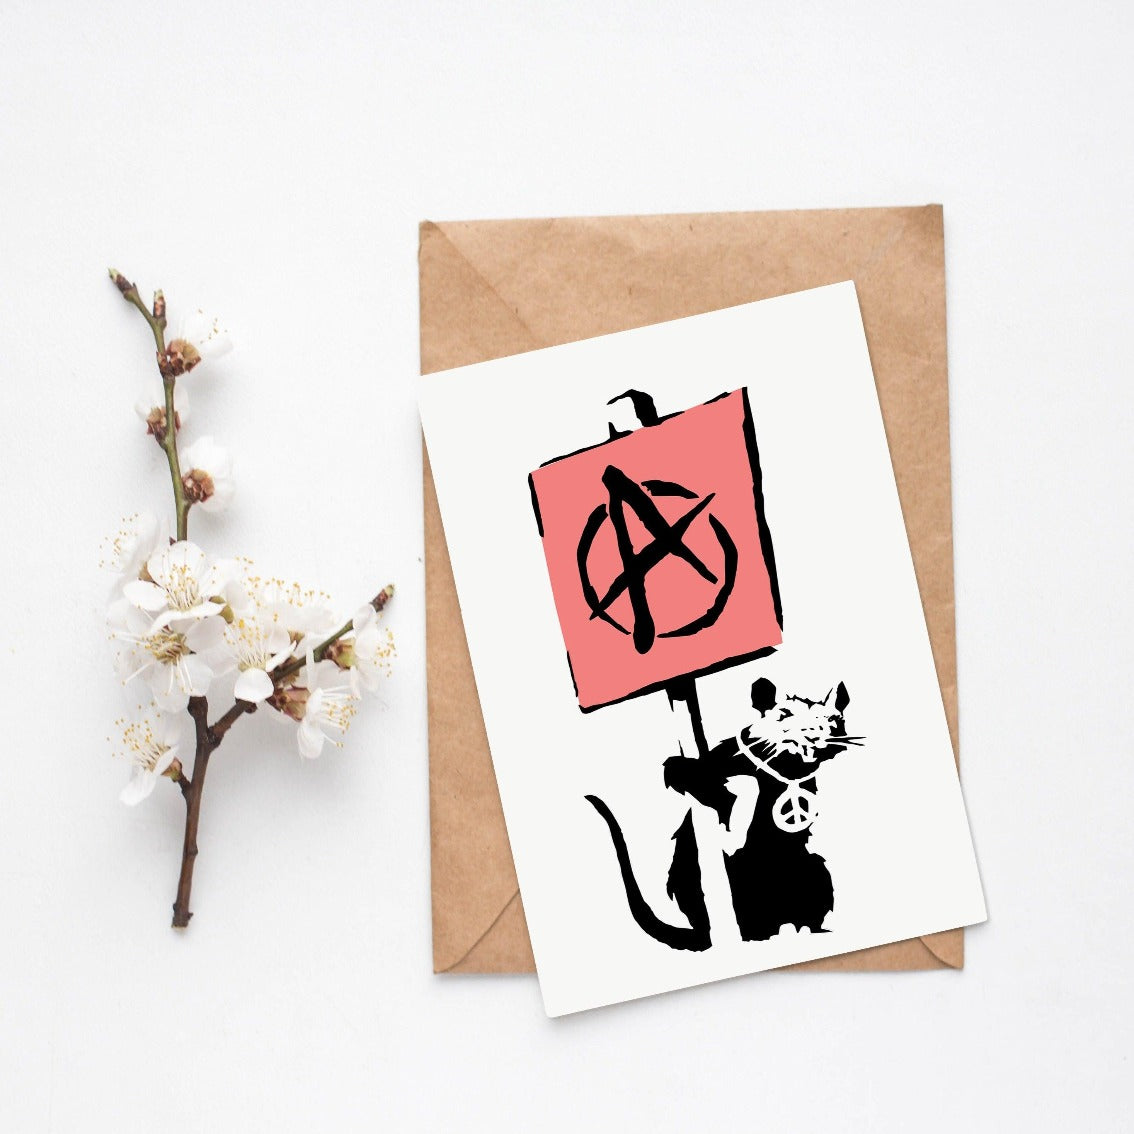 The "Rat" by Banksy is one of the most iconic pieces of street art out there. And now, you can have a print of it in your own home. This high-quality print by 98Types is the perfect way to add a little edge to your decor. It's also a great conversation starter. So, go ahead and add this Rat print to your cart now. - 98types